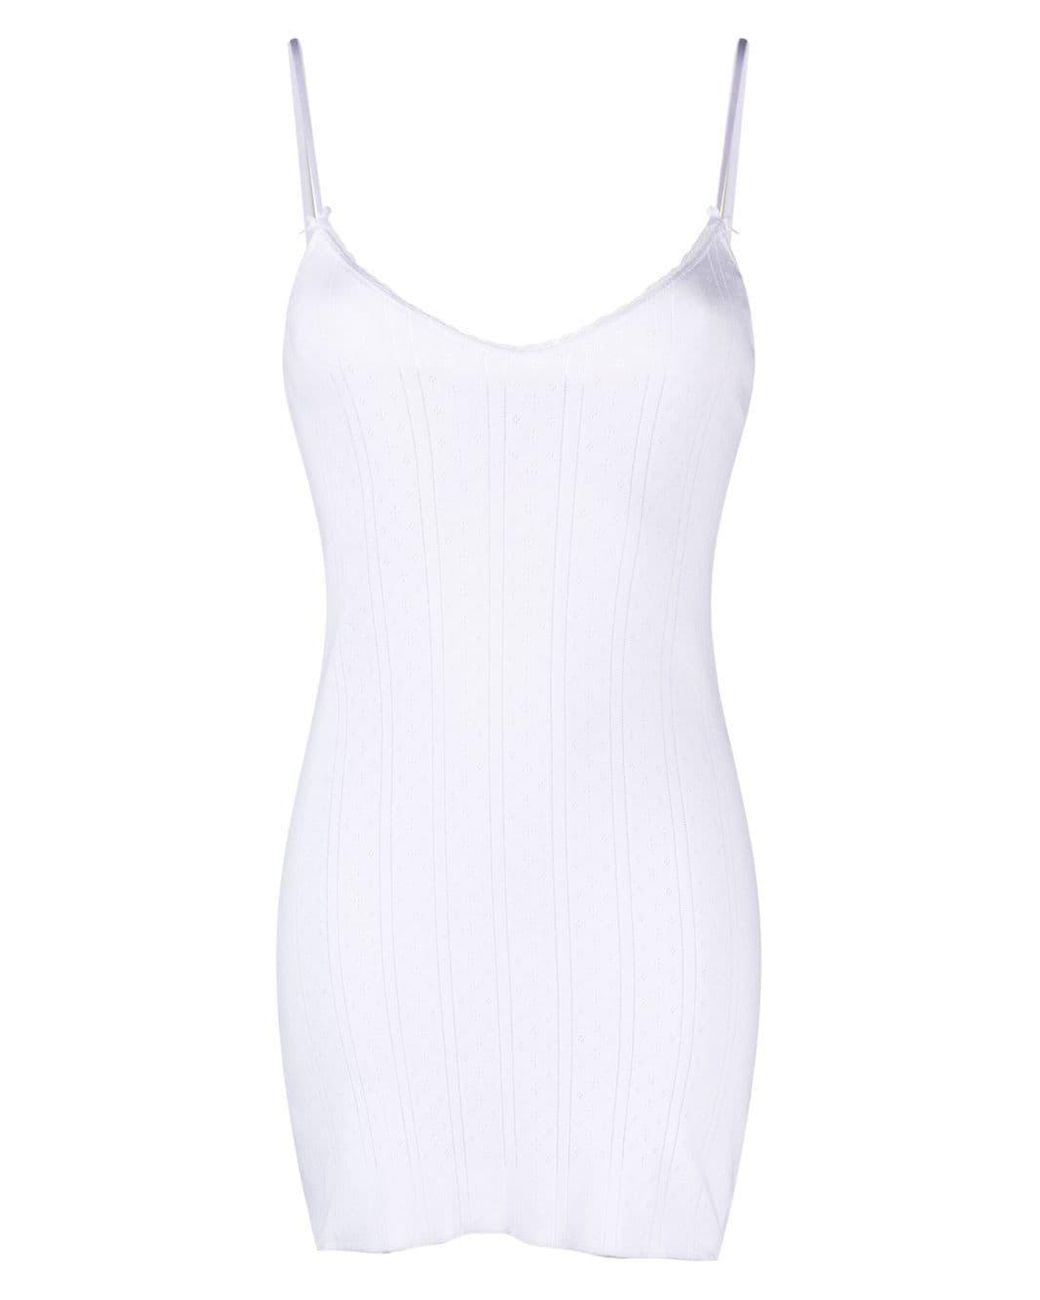 Cou Cou Intimates Cami Slip Dress in White | Lyst